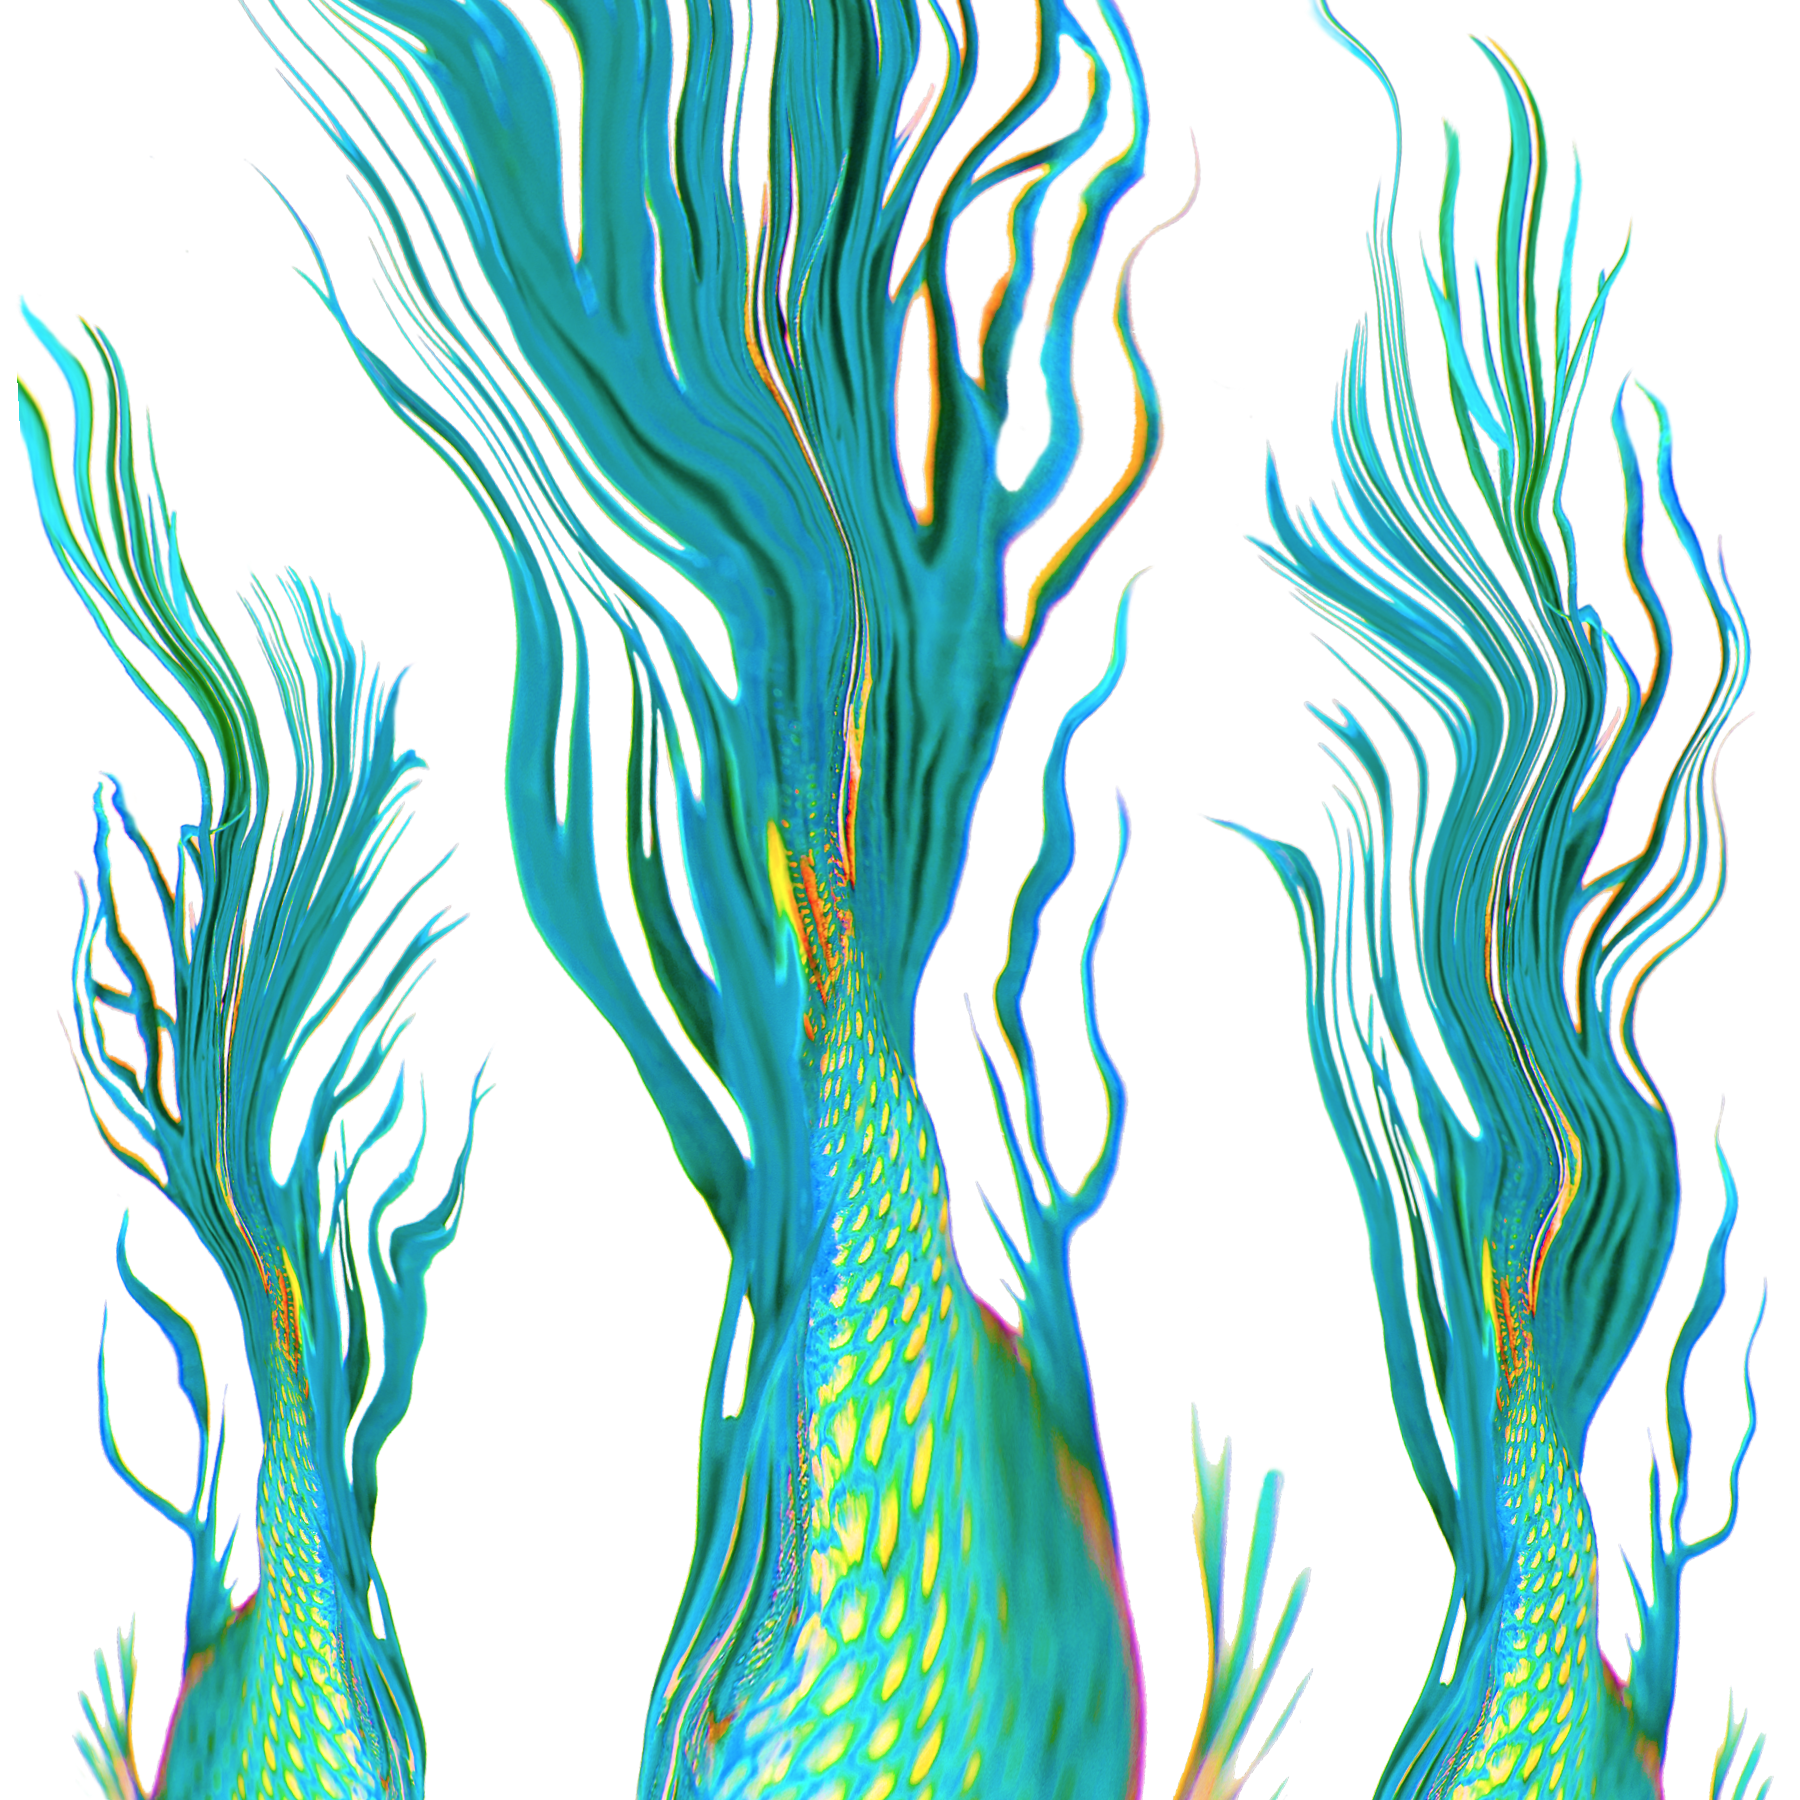 tiwia swatch options dive deep fish tails.png